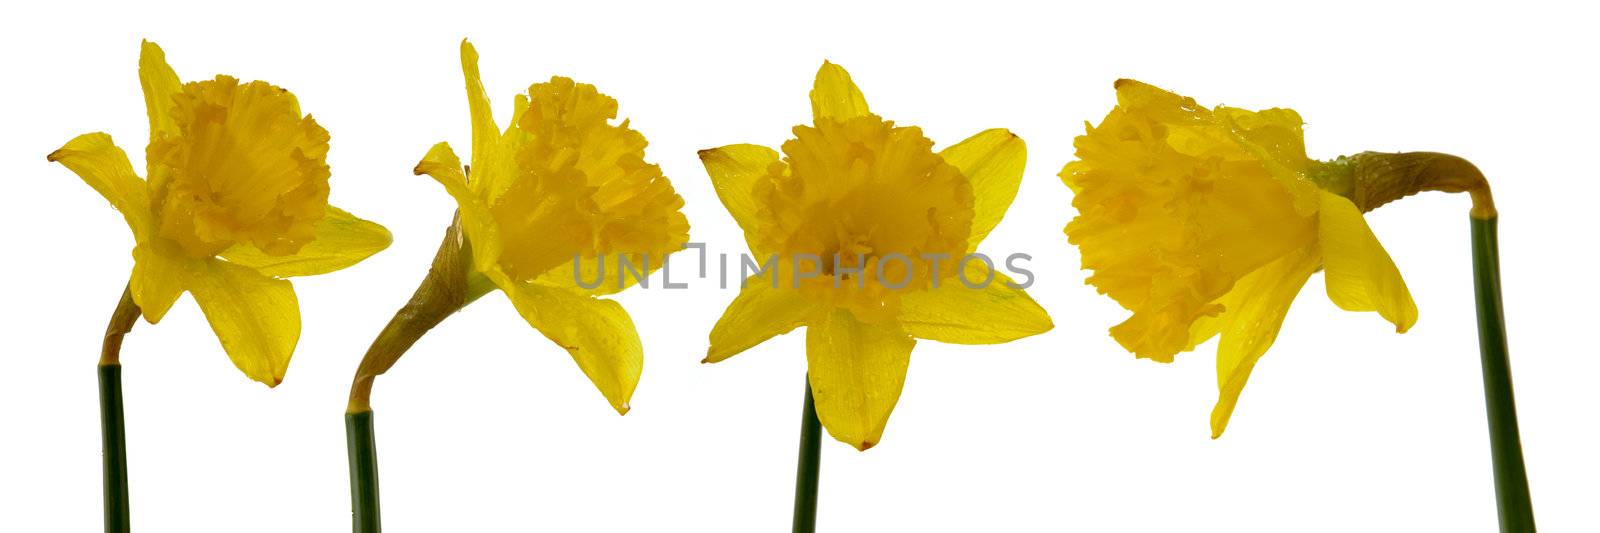 4 Yellow daffodils with waterdrops. On a clean white background.